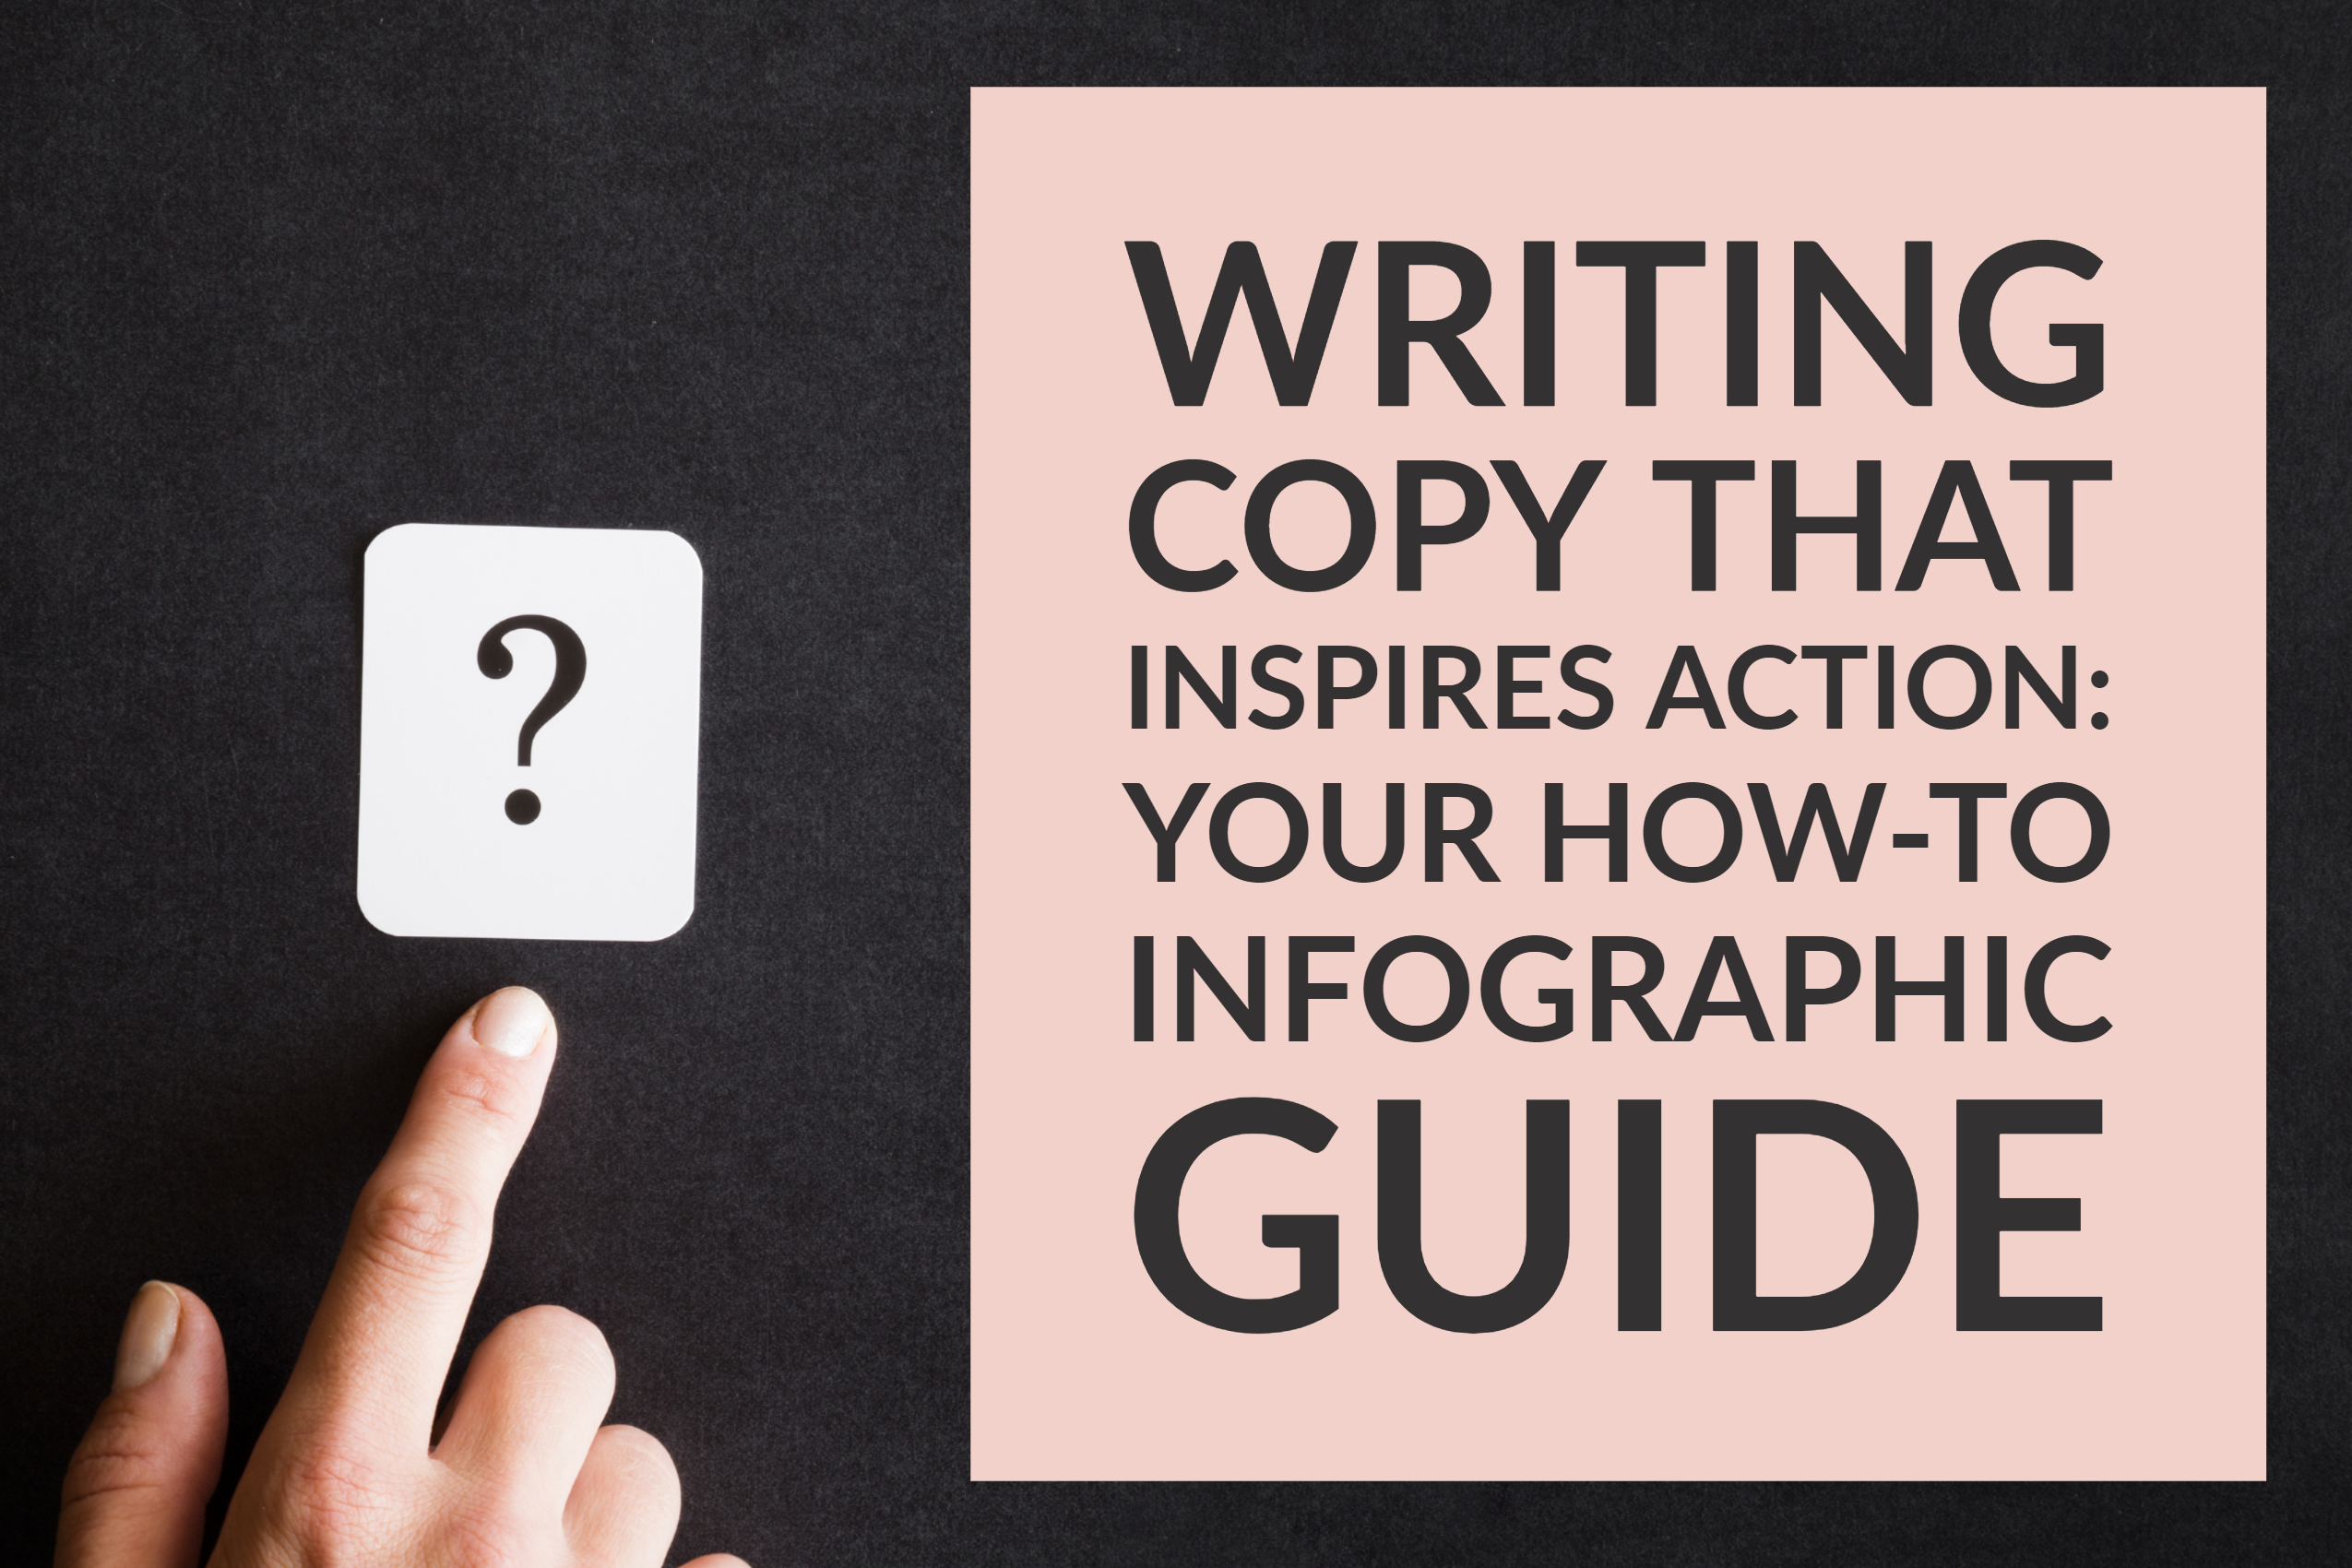 Writing Copy That Inspires Action_ Your How-To Infographic Guide